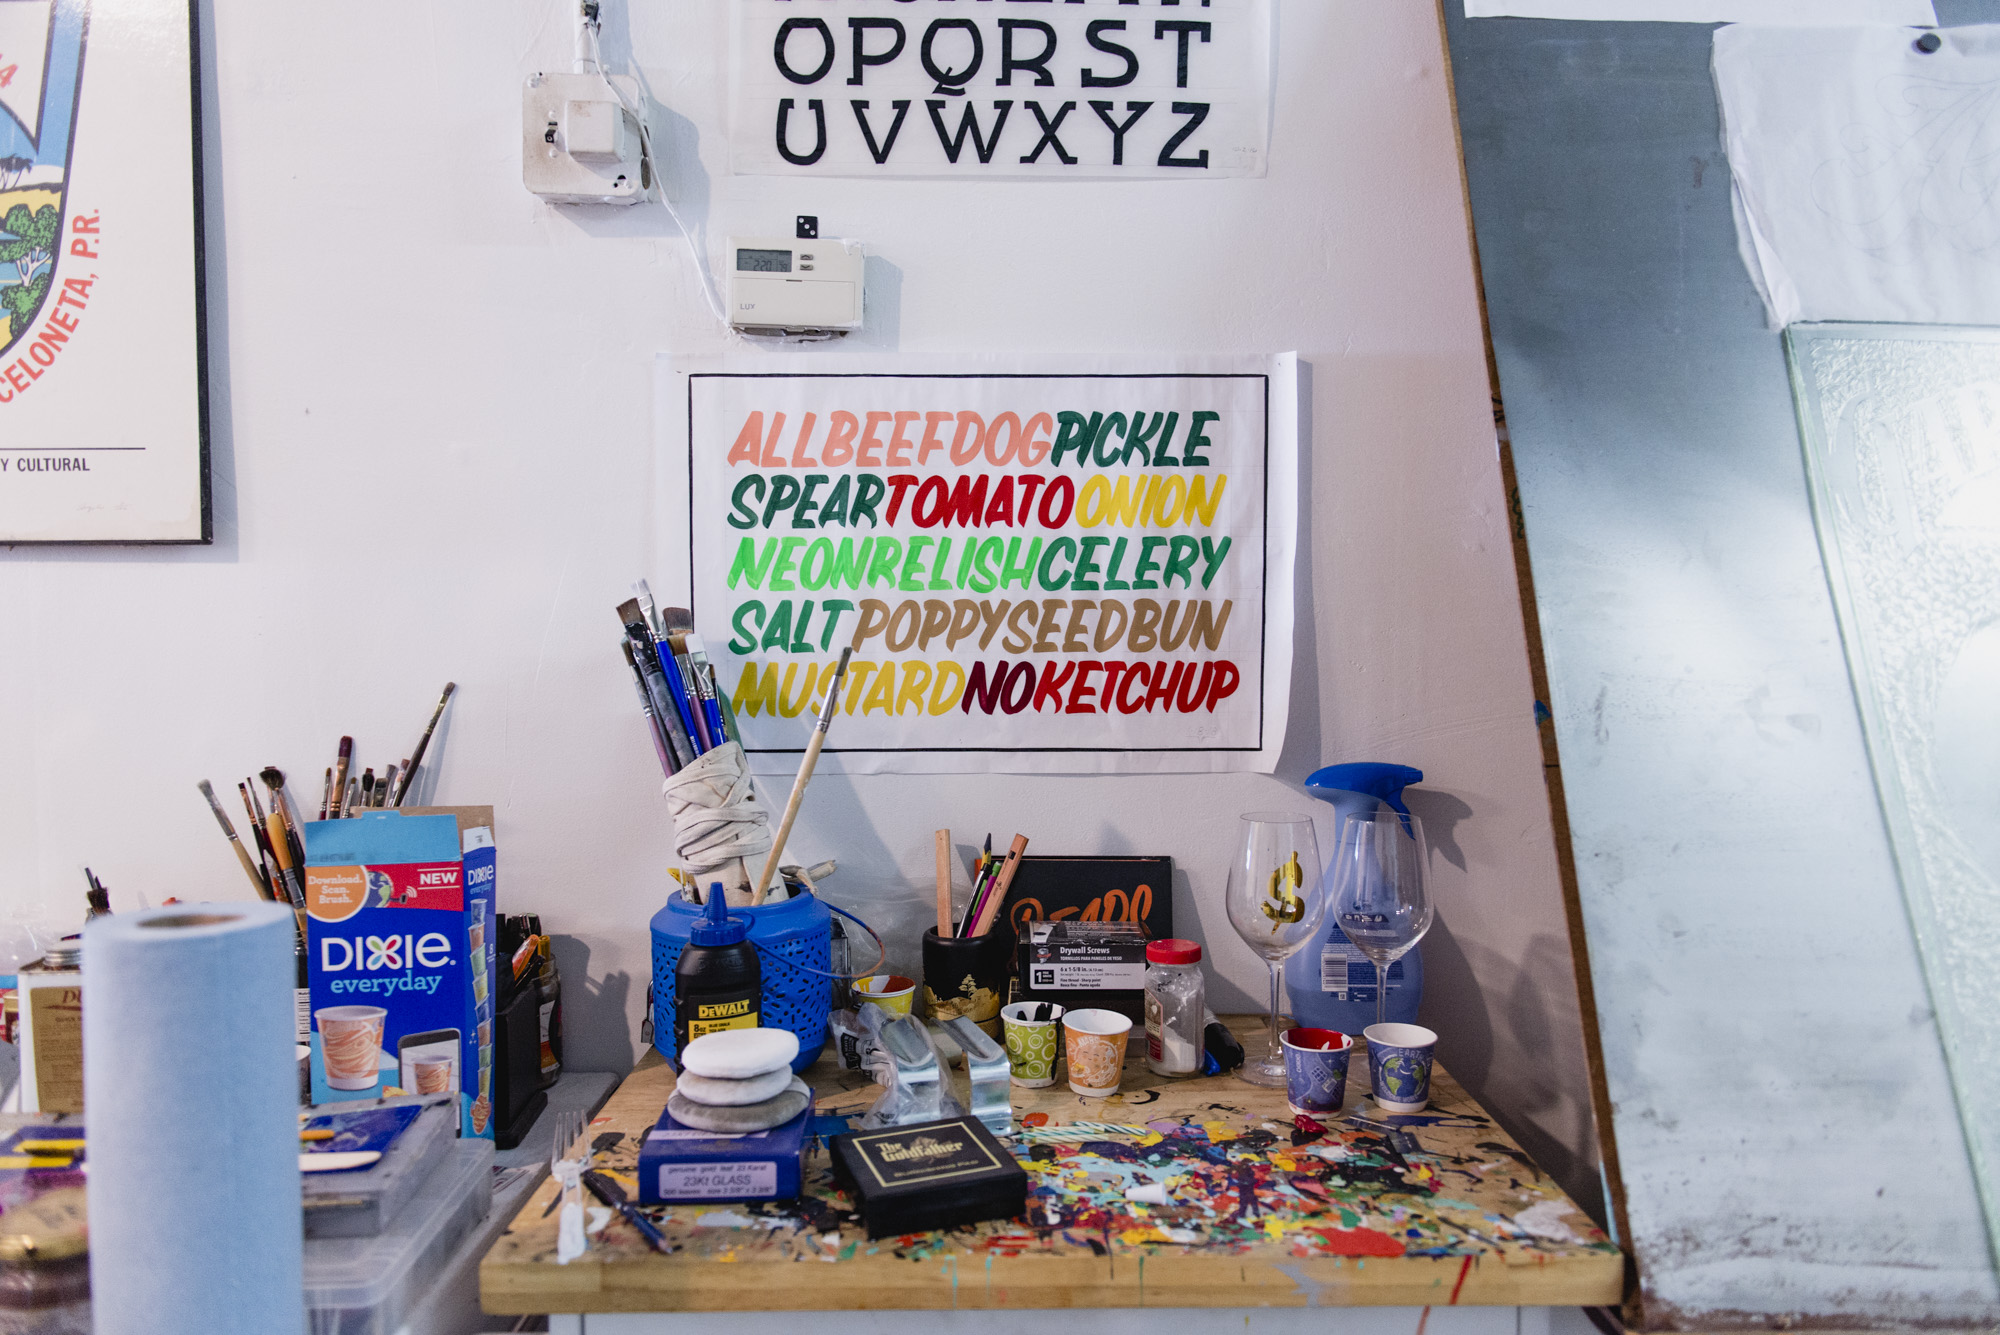 Image: Close up of various materials and tools used by Kelsey and Andrew. There are signs on the wall and colorful paint on the table. Photo by Ryan Edmund Thiel.